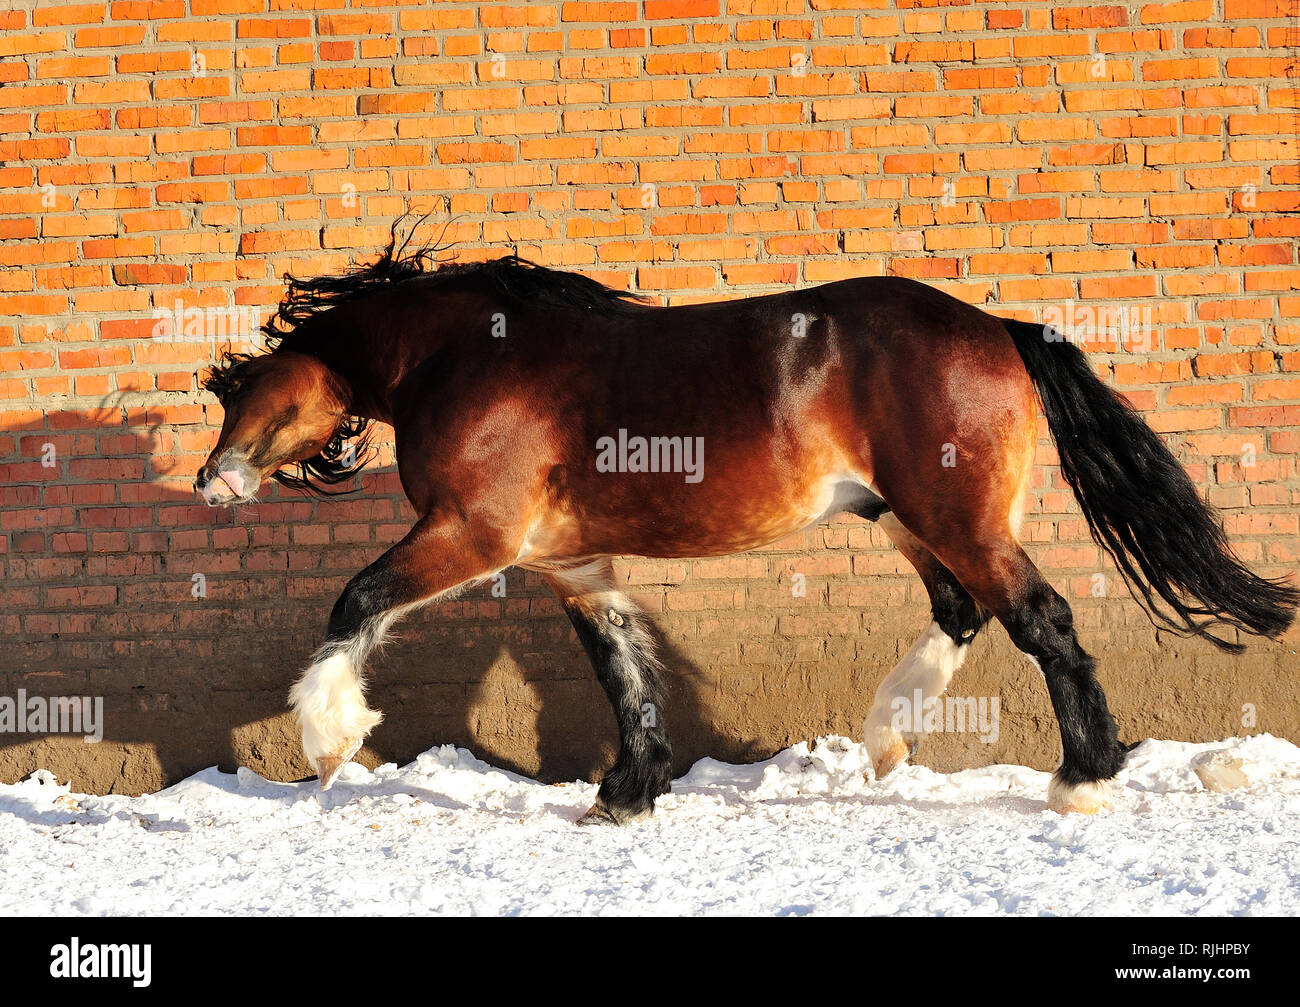 Bay draft horse with black mane and tail runs happily along red brick wall being silly. Horizontal photo, side viewm in motion. Stock Photo